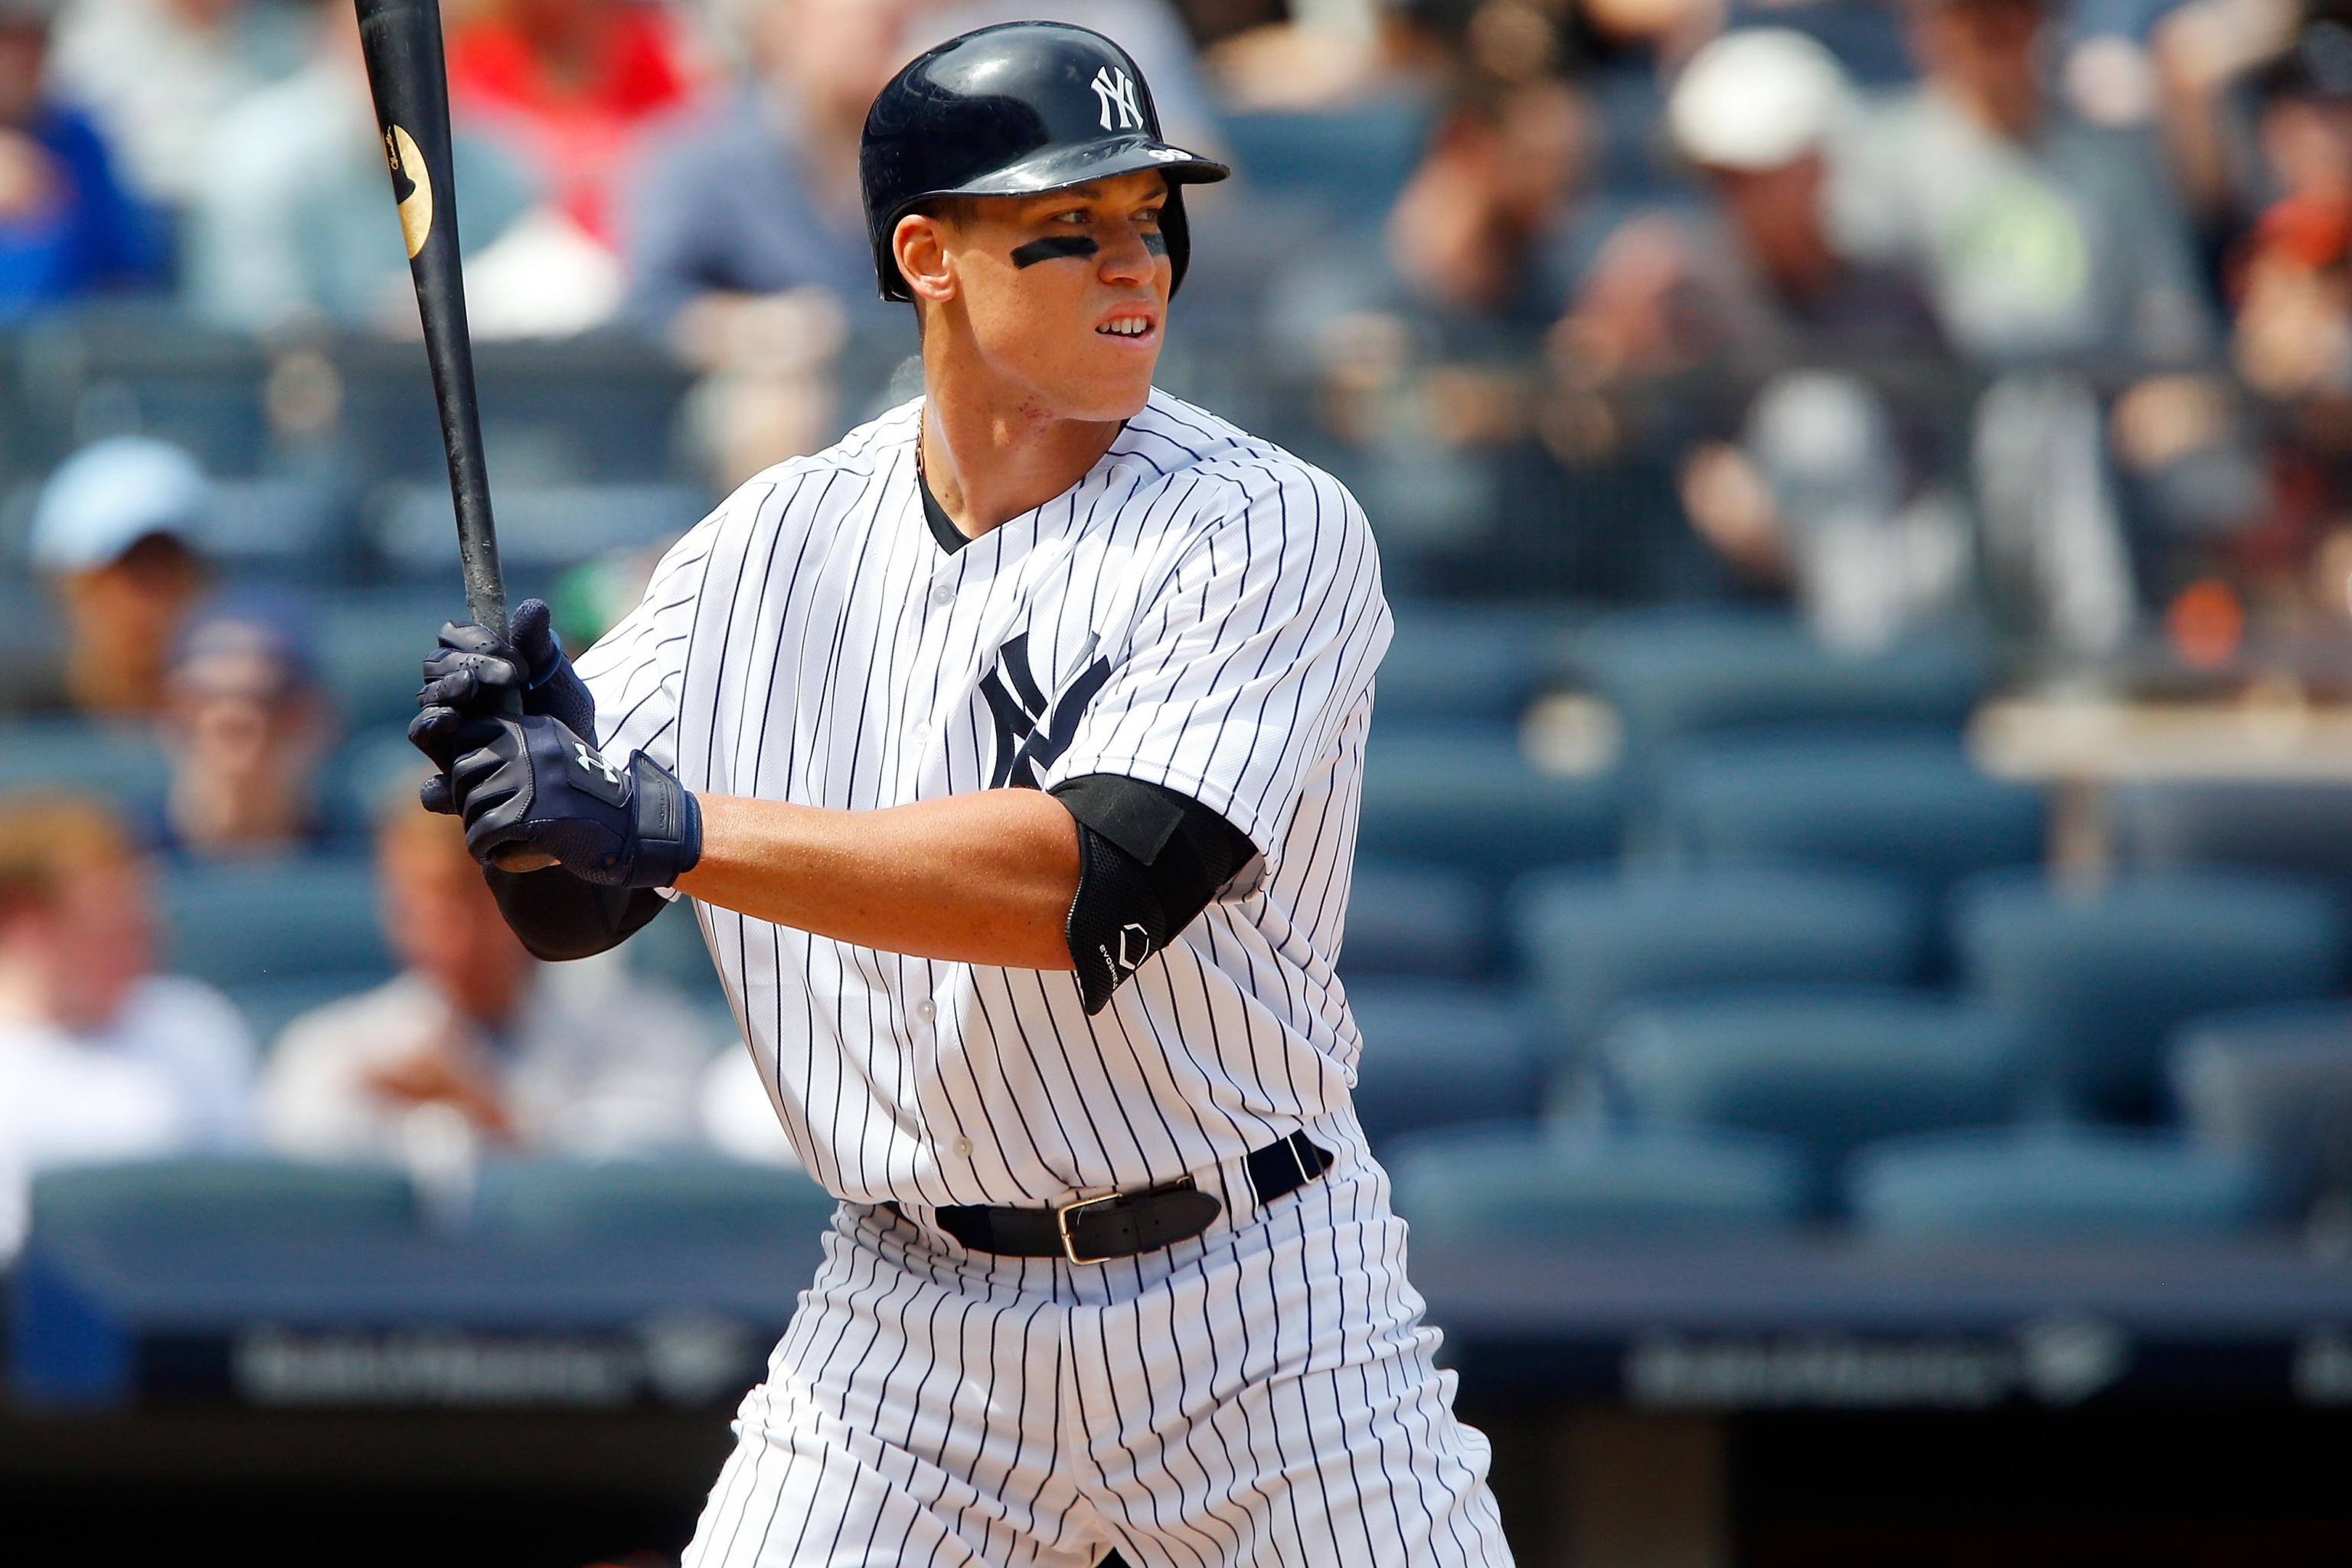 Aaron Judge, much like Derek Jeter, should never play for another